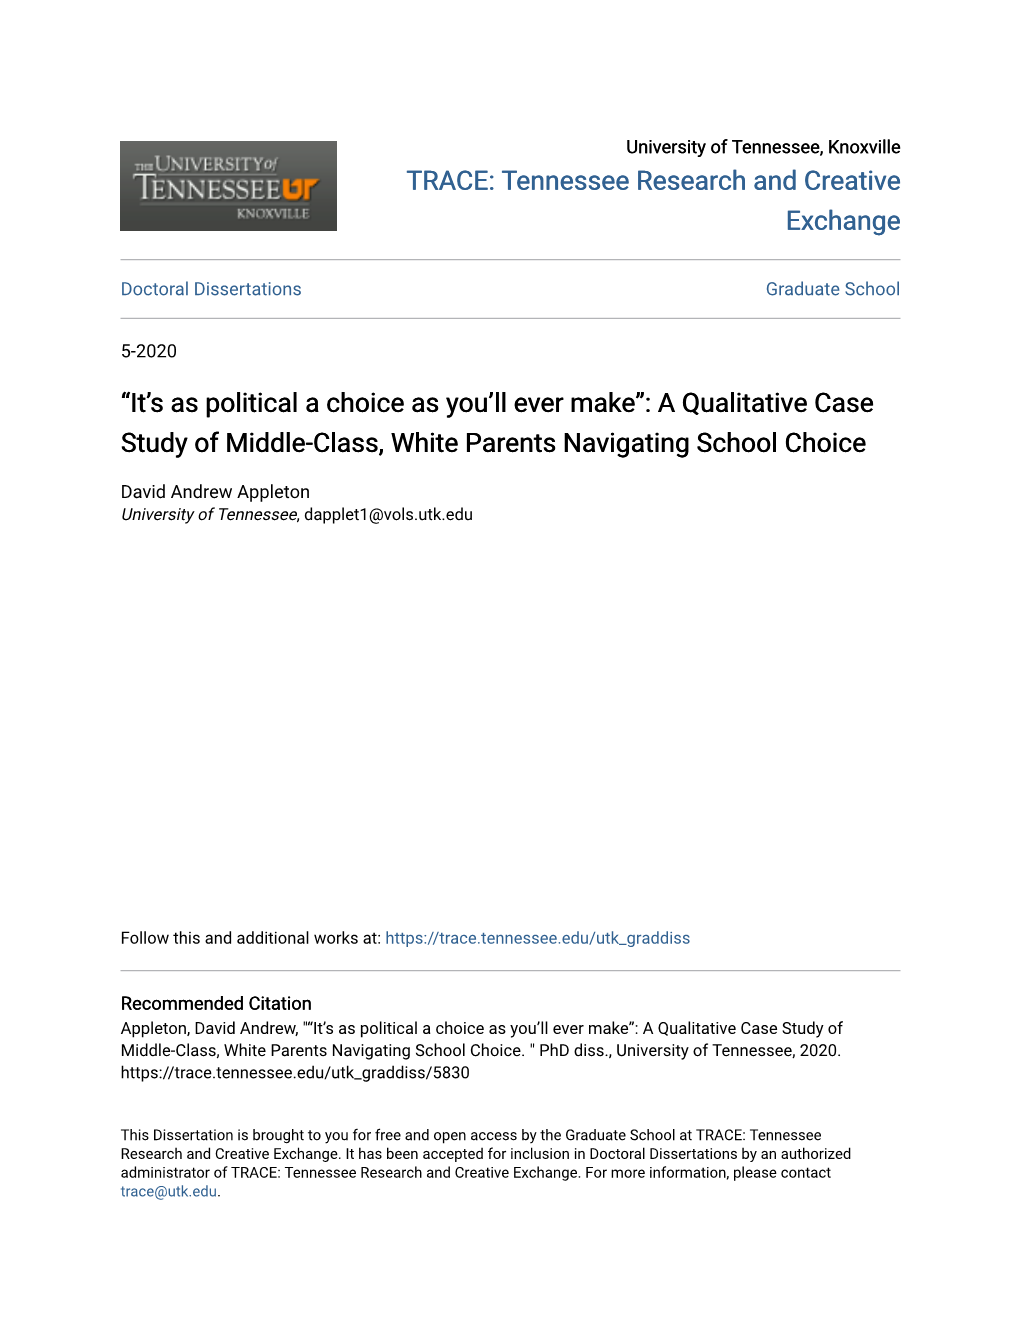 “It's As Political a Choice As You'll Ever Make”: a Qualitative Case Study Of